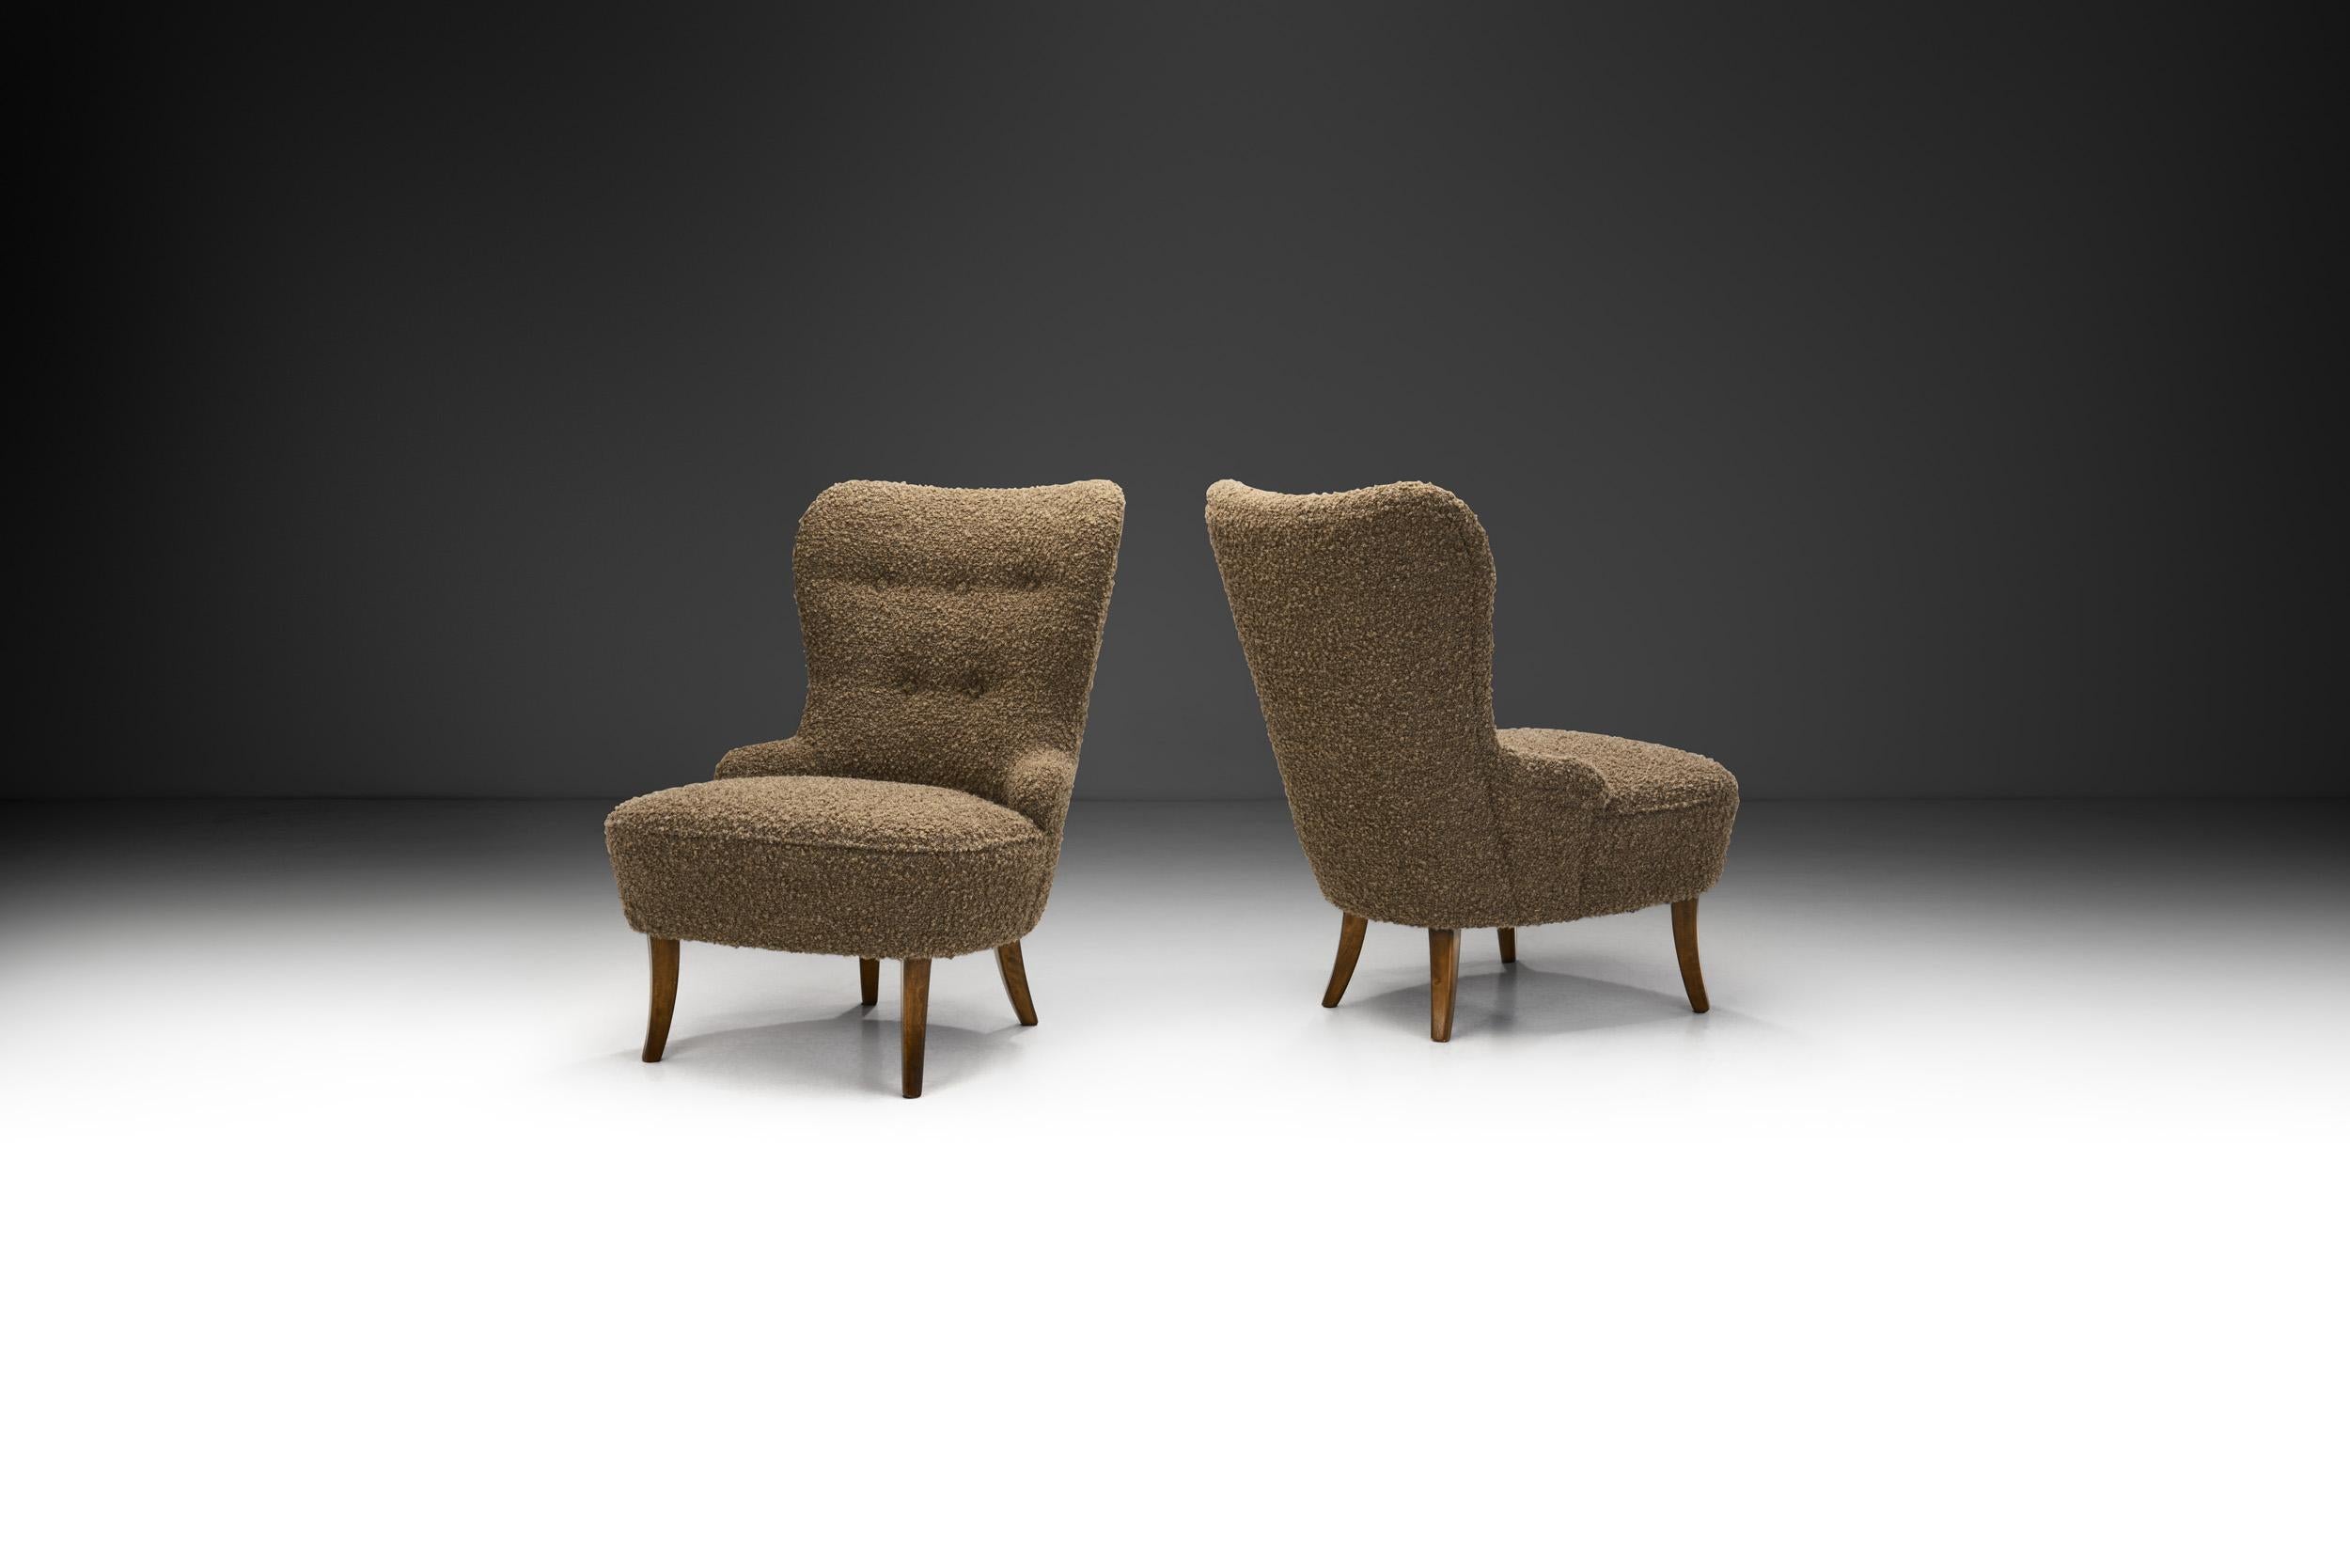 The so-called Emma chair got its name in 1821 after a reddish-brown colour in Sweden, called the “Emma colour”. Since 1830 it has been a term for upholstered armchairs in the neo-rococo style with a high, curved back and small or no armrests. This